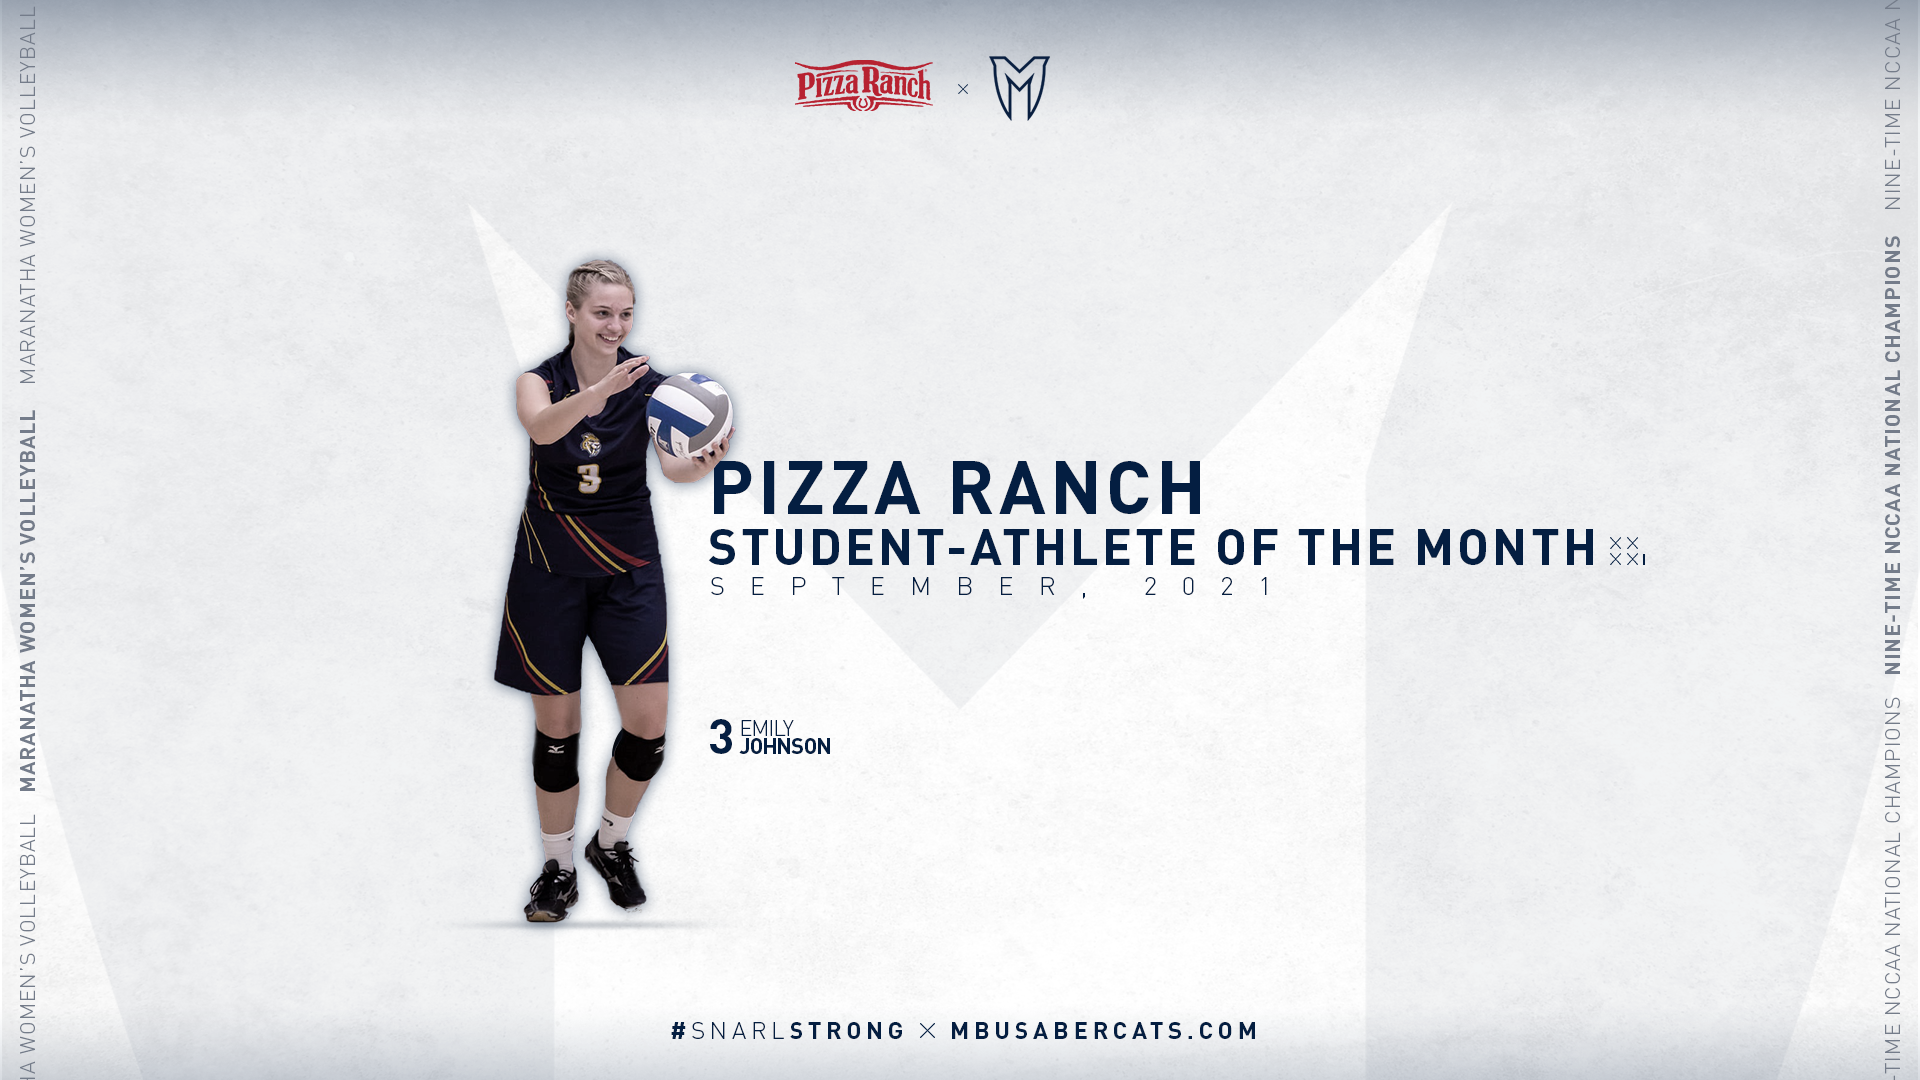 Johnson Named Pizza Ranch Student-Athlete of the Month